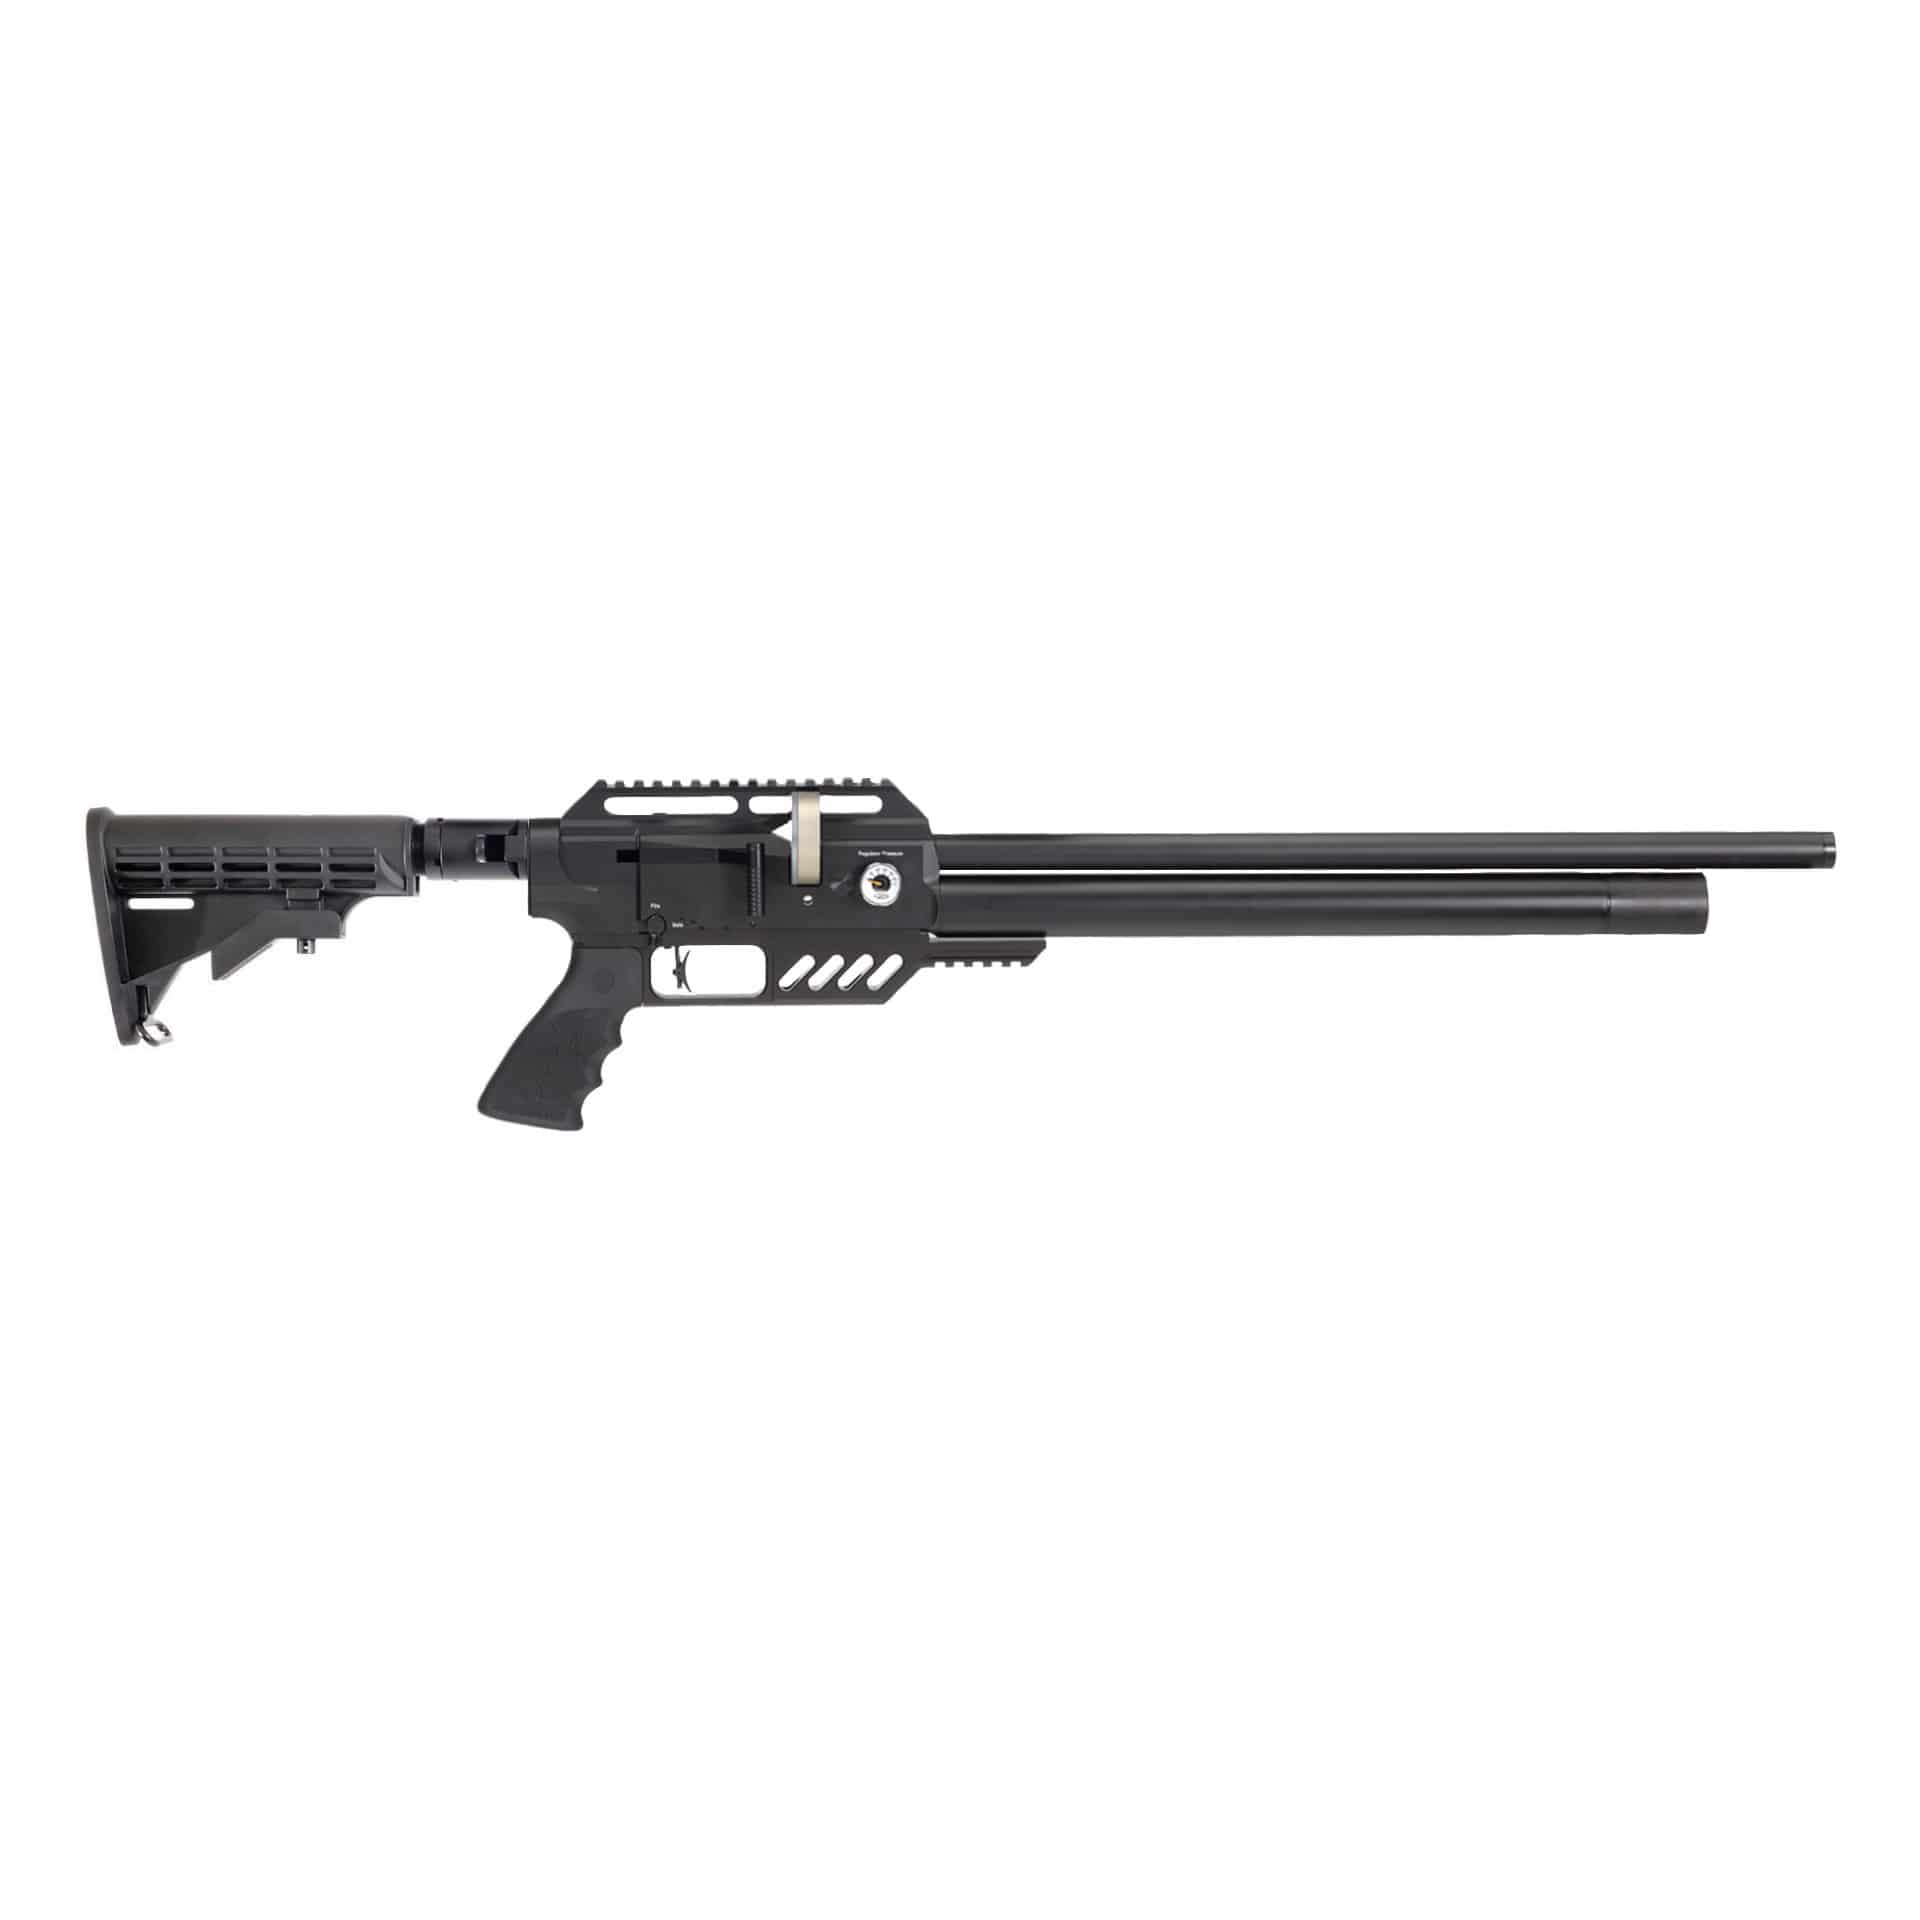 FX Dreamline Tactical with folding stock - Cal. 4.5 mm